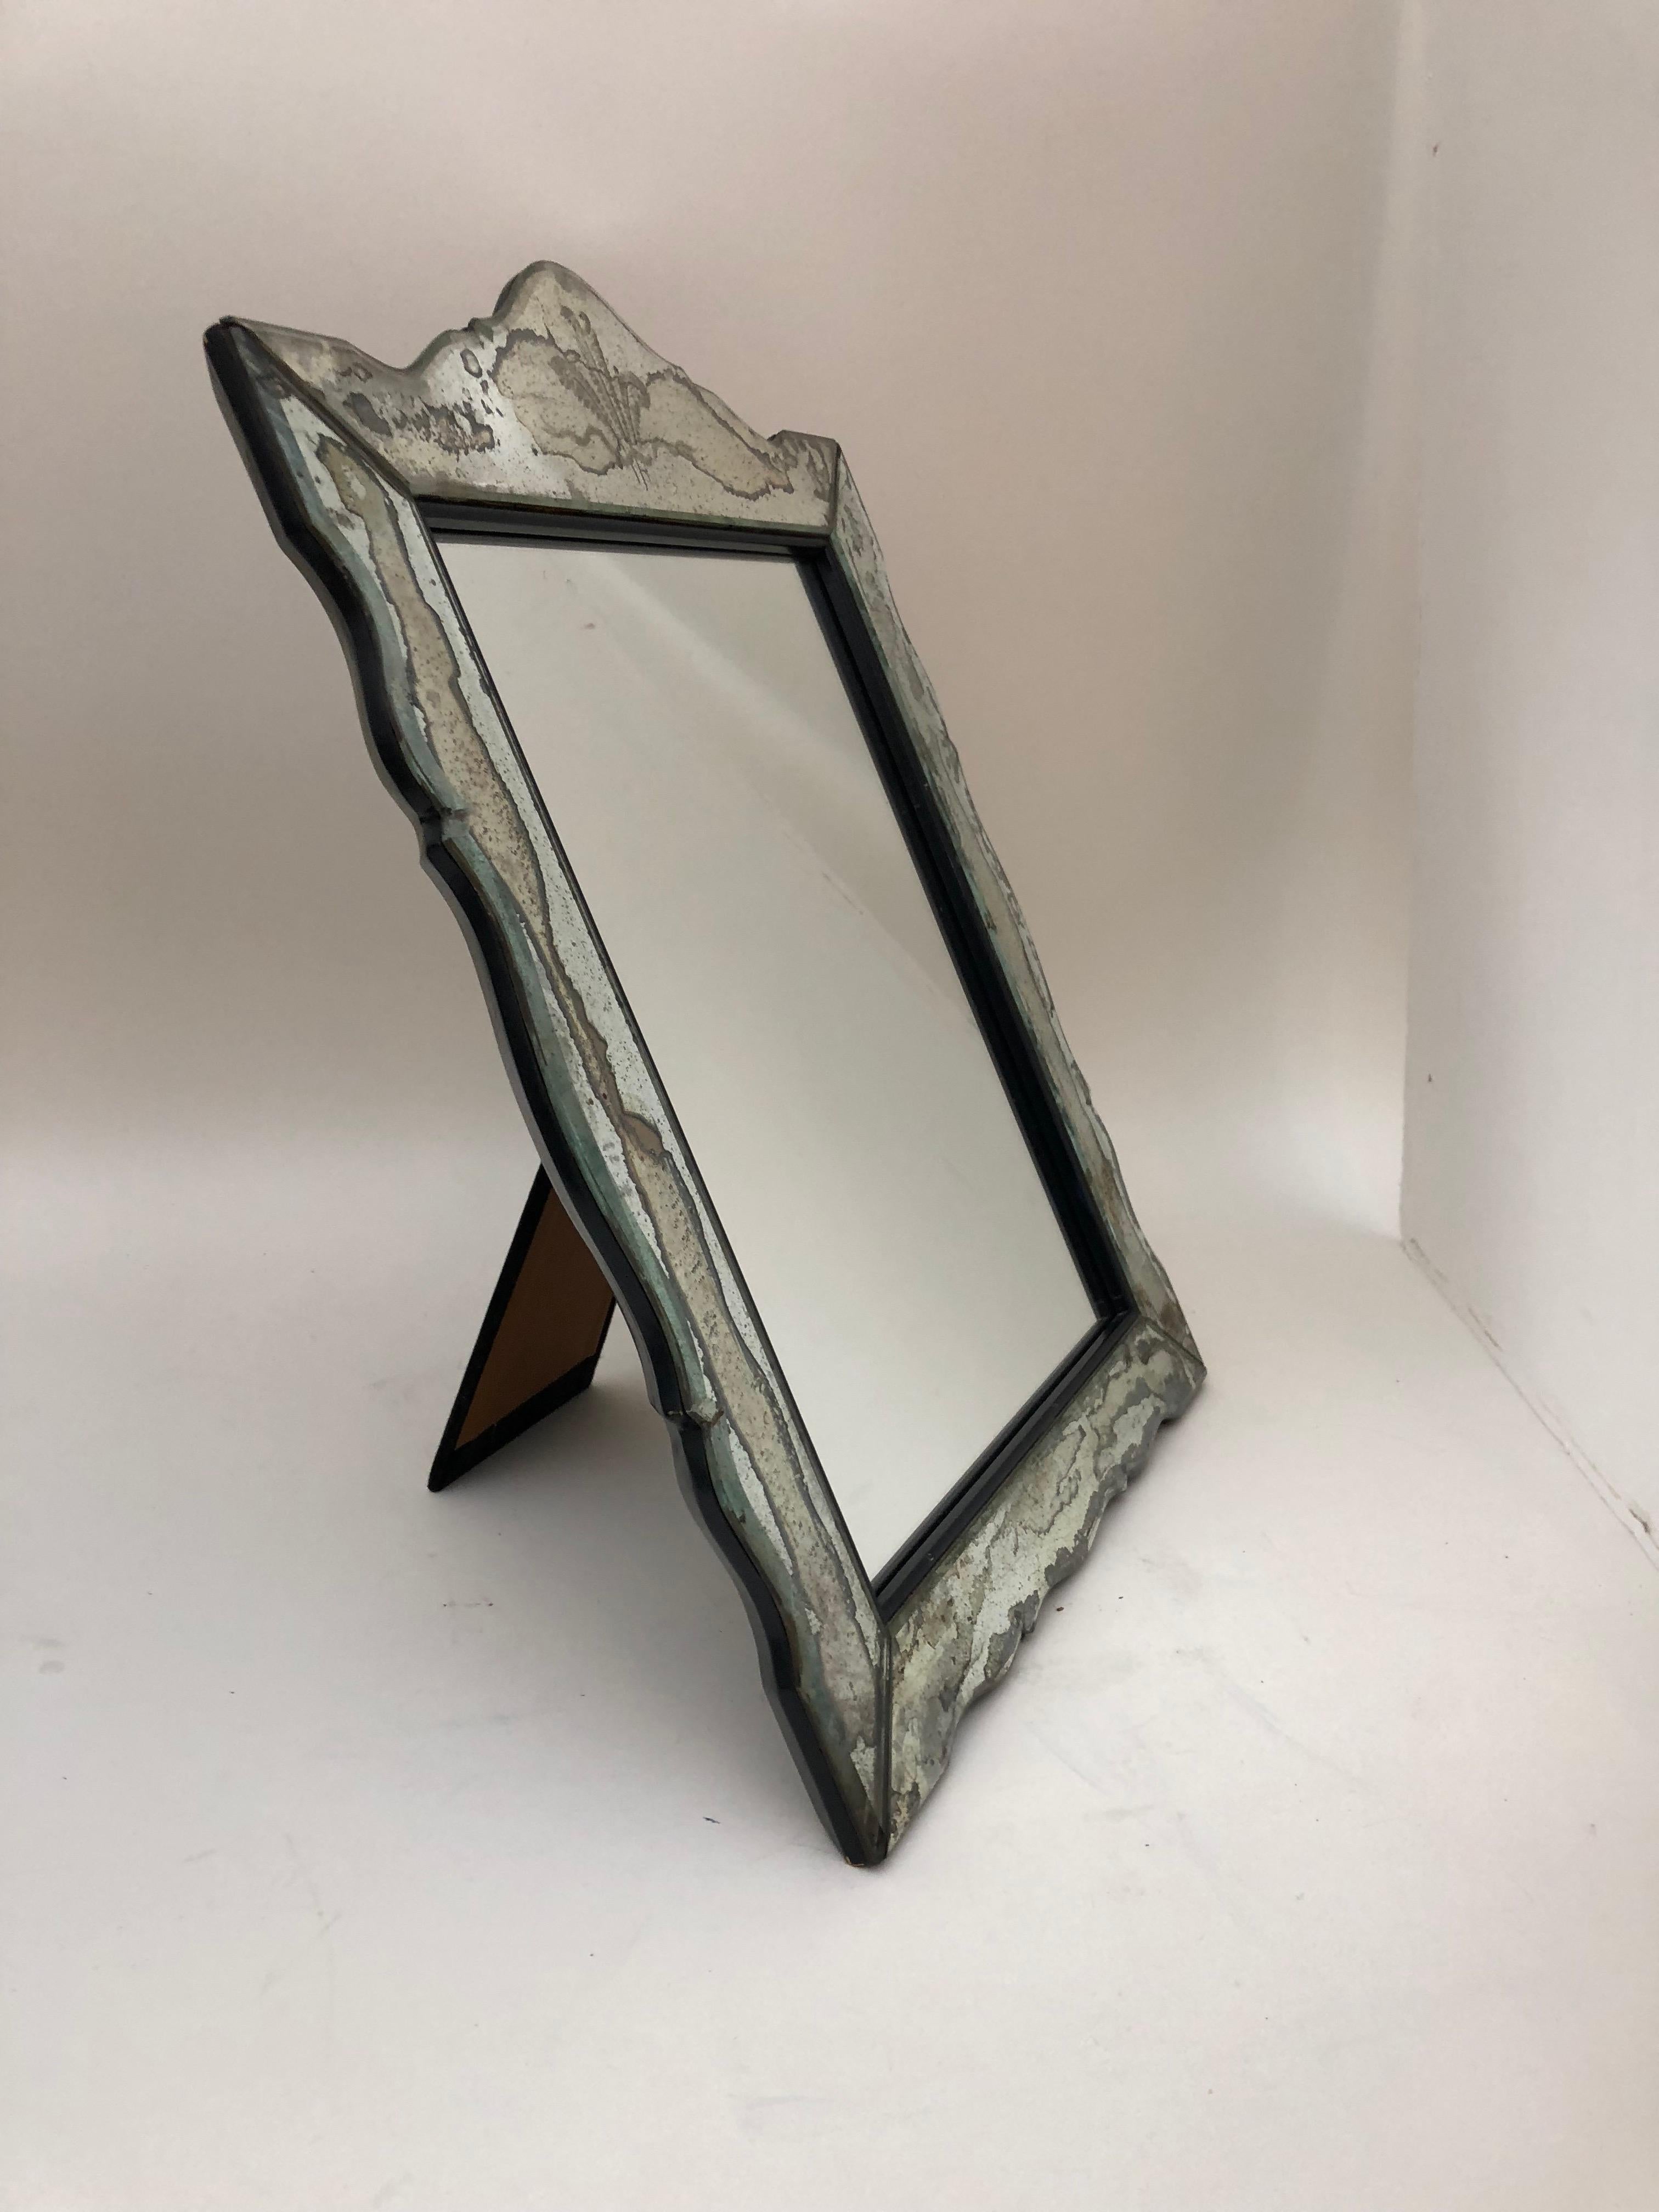 This English 1930s mirror-framed dressing table mirror could also serve as a frame for a photograph. On the cresting are three acid-etched plumes, the device of the handsome young Edward, Prince of Wales, which became a popular decorative motif in